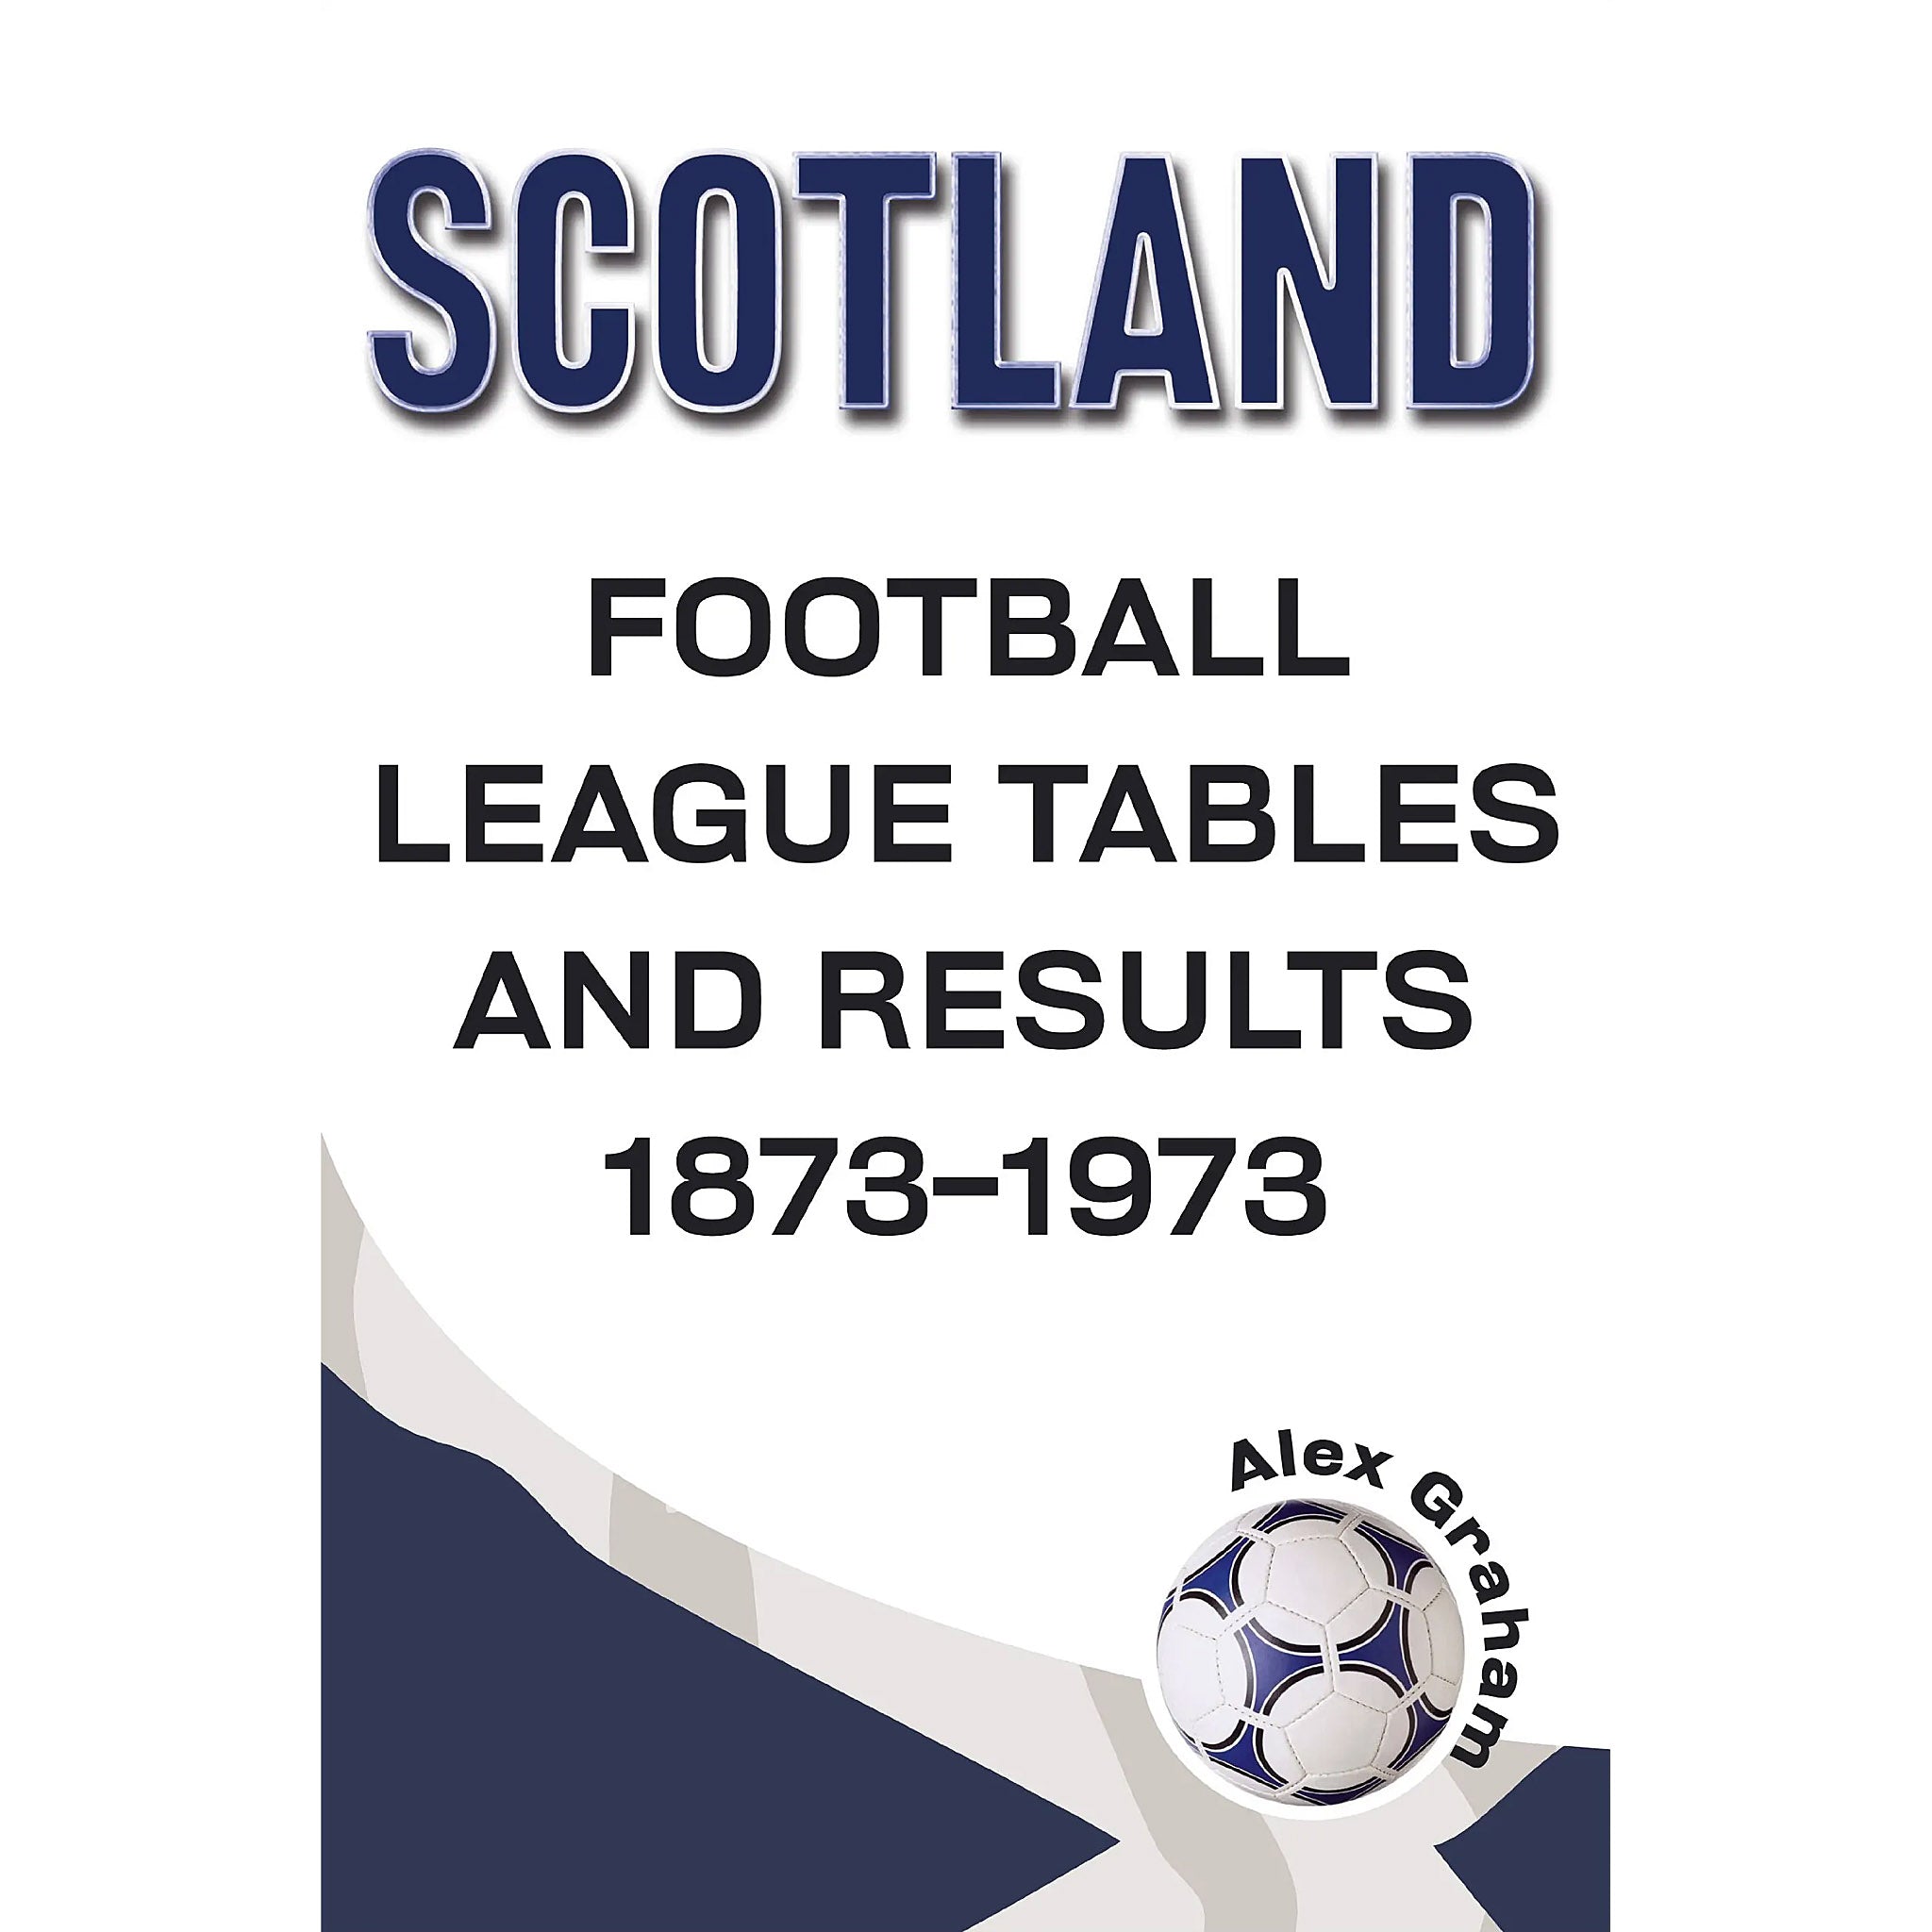 Scotland – Football League Tables and Results 1873-1973